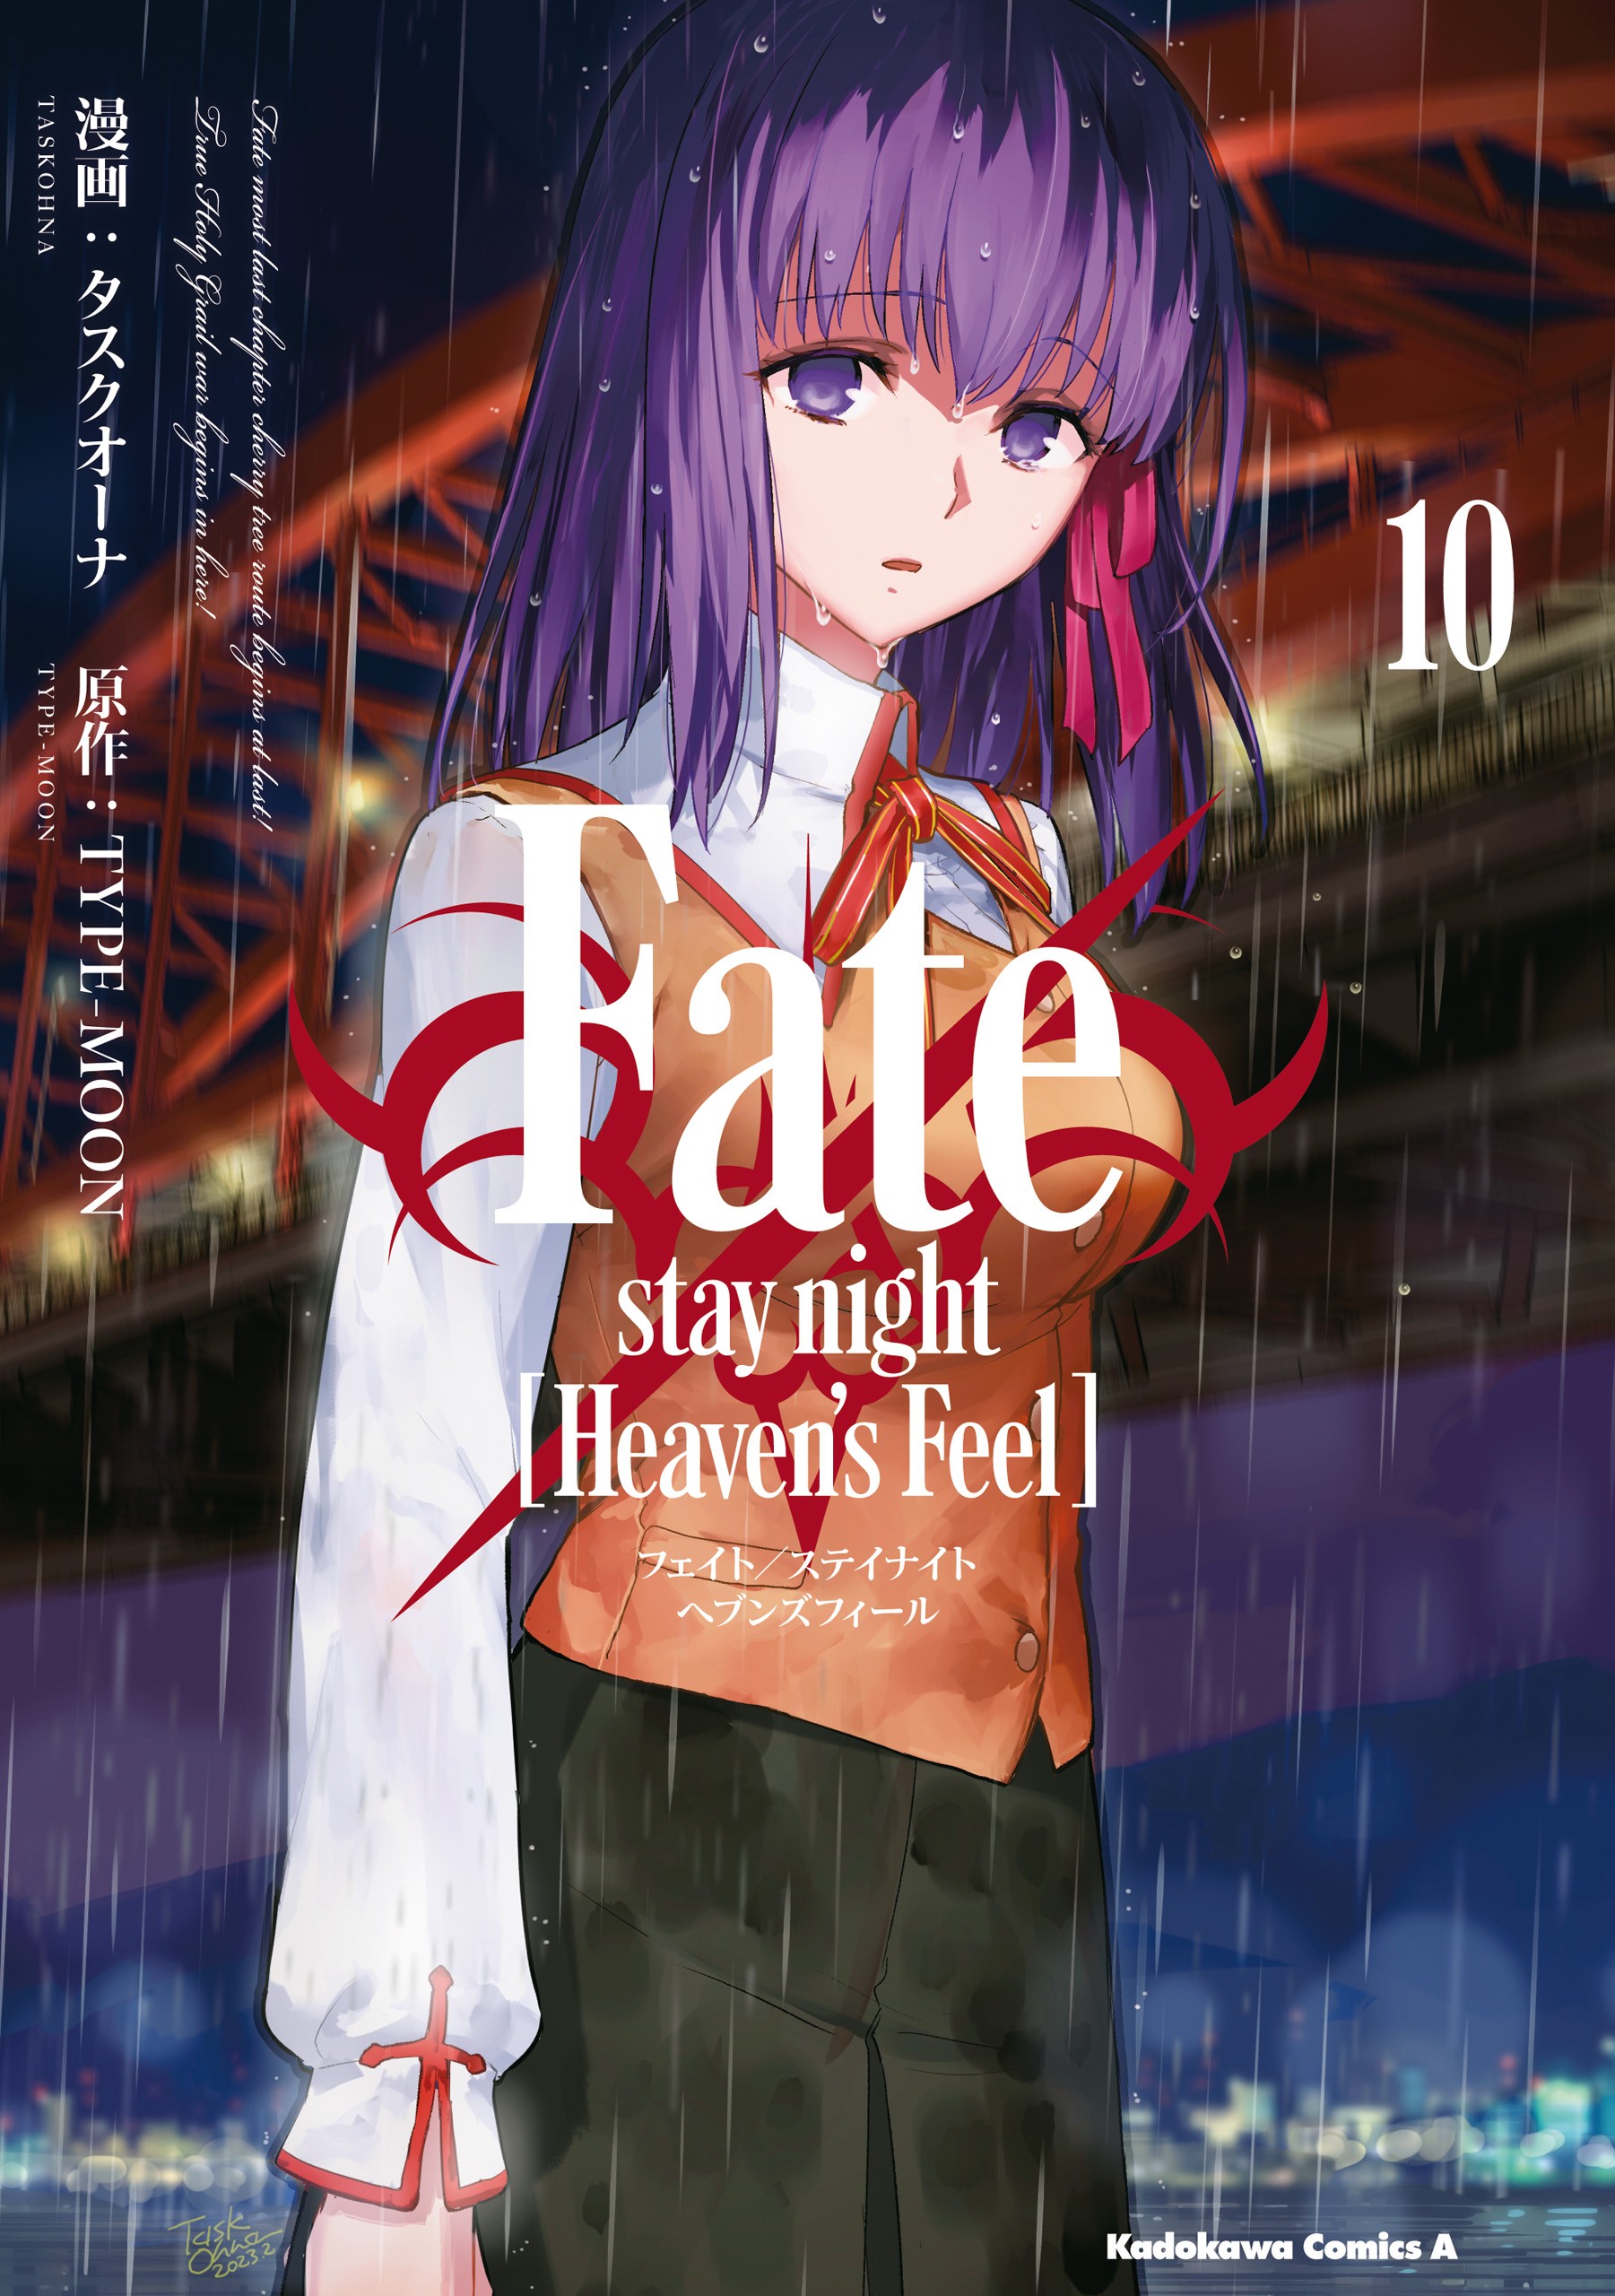 Opinions on the three mangas of Fate/stay night? I love the animes and the  VN of F/SN, now I'm curious about the mangas : r/fatestaynight